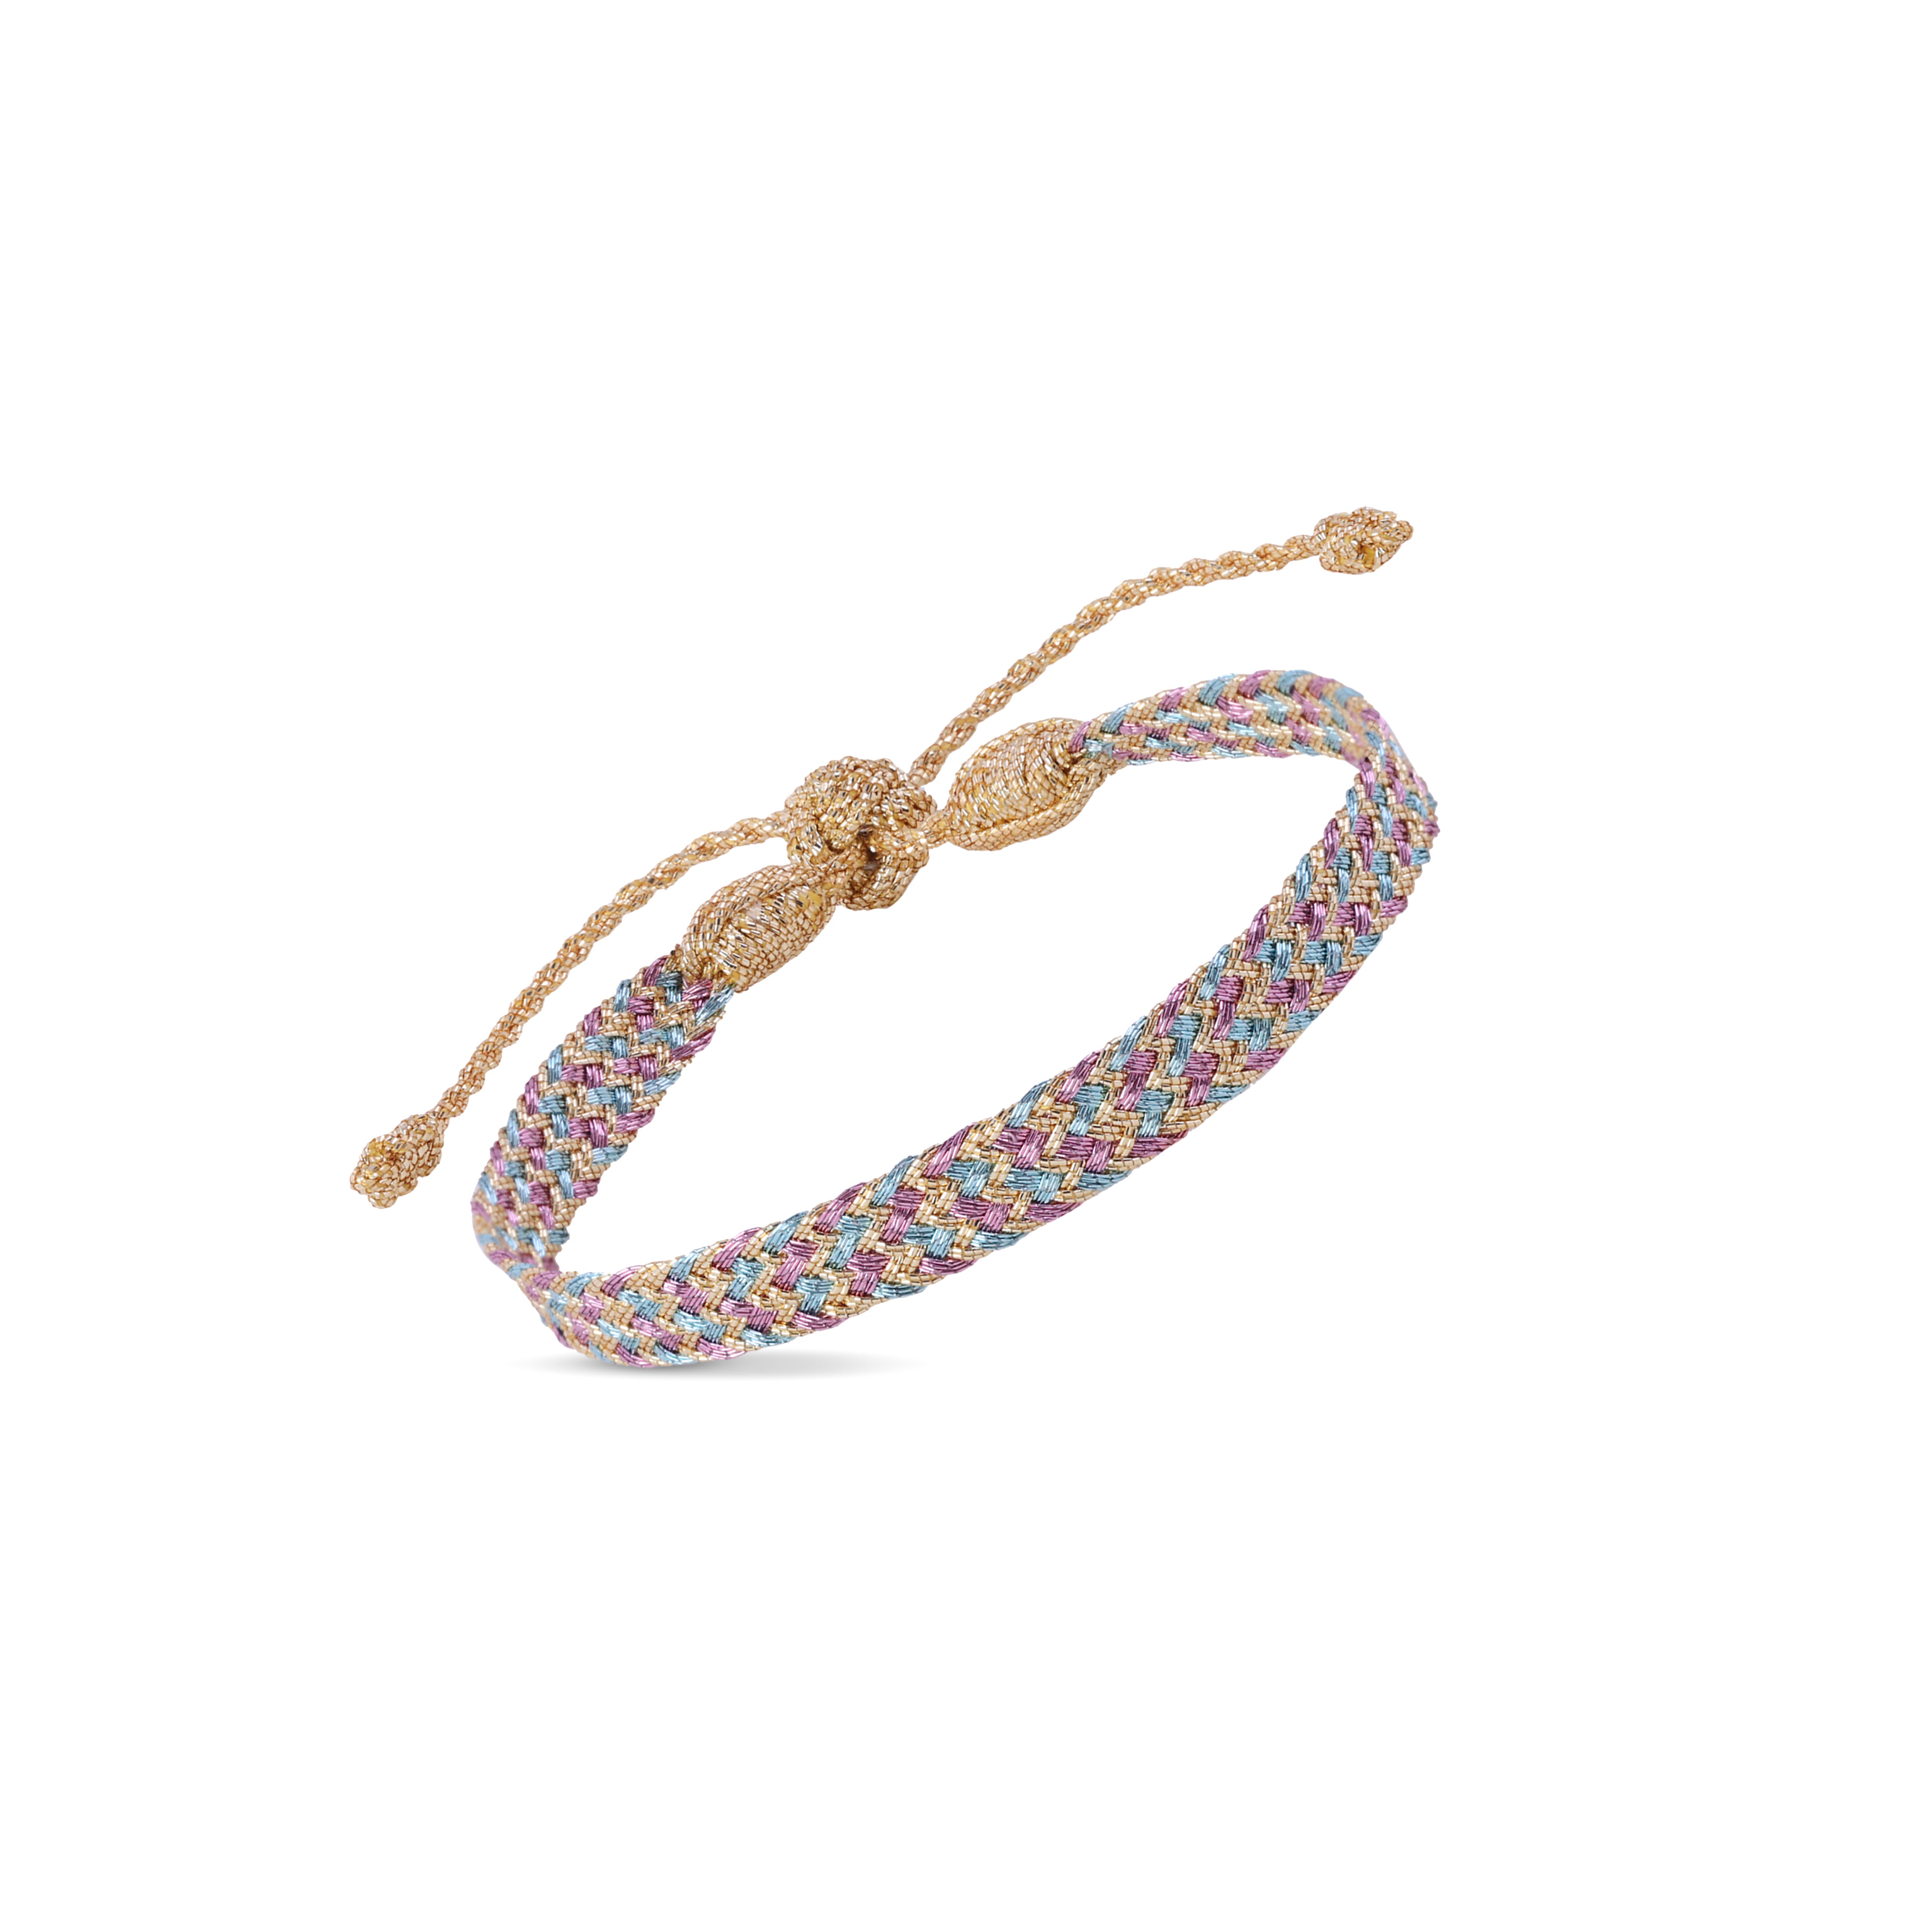 Ania n°2 Bracelet in Gold Cashmere Rose